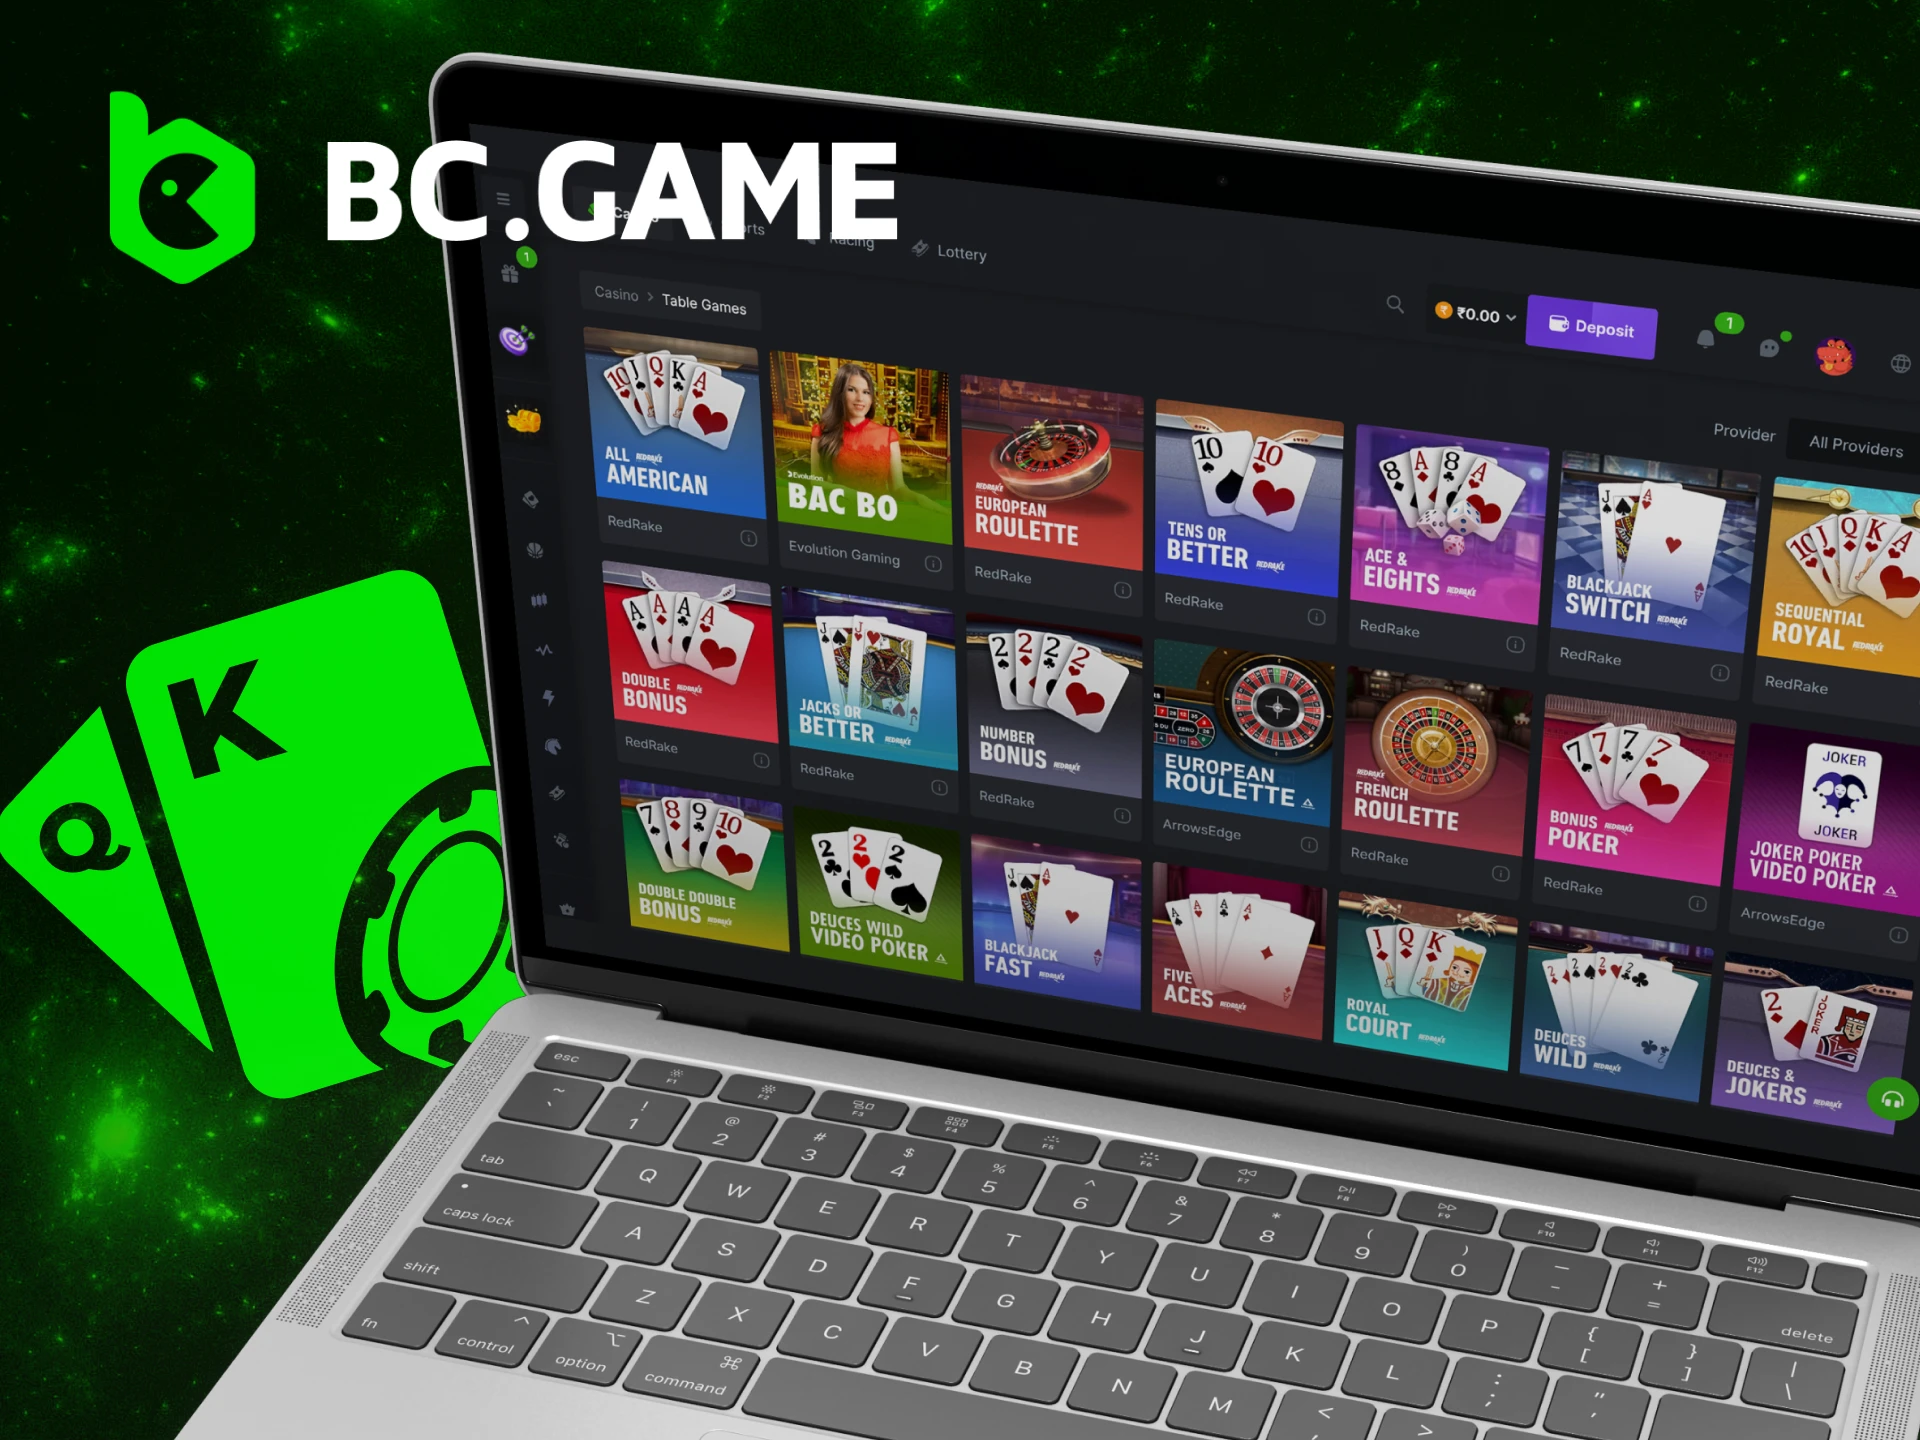 What are the most popular Table Games options on the BC Game website.